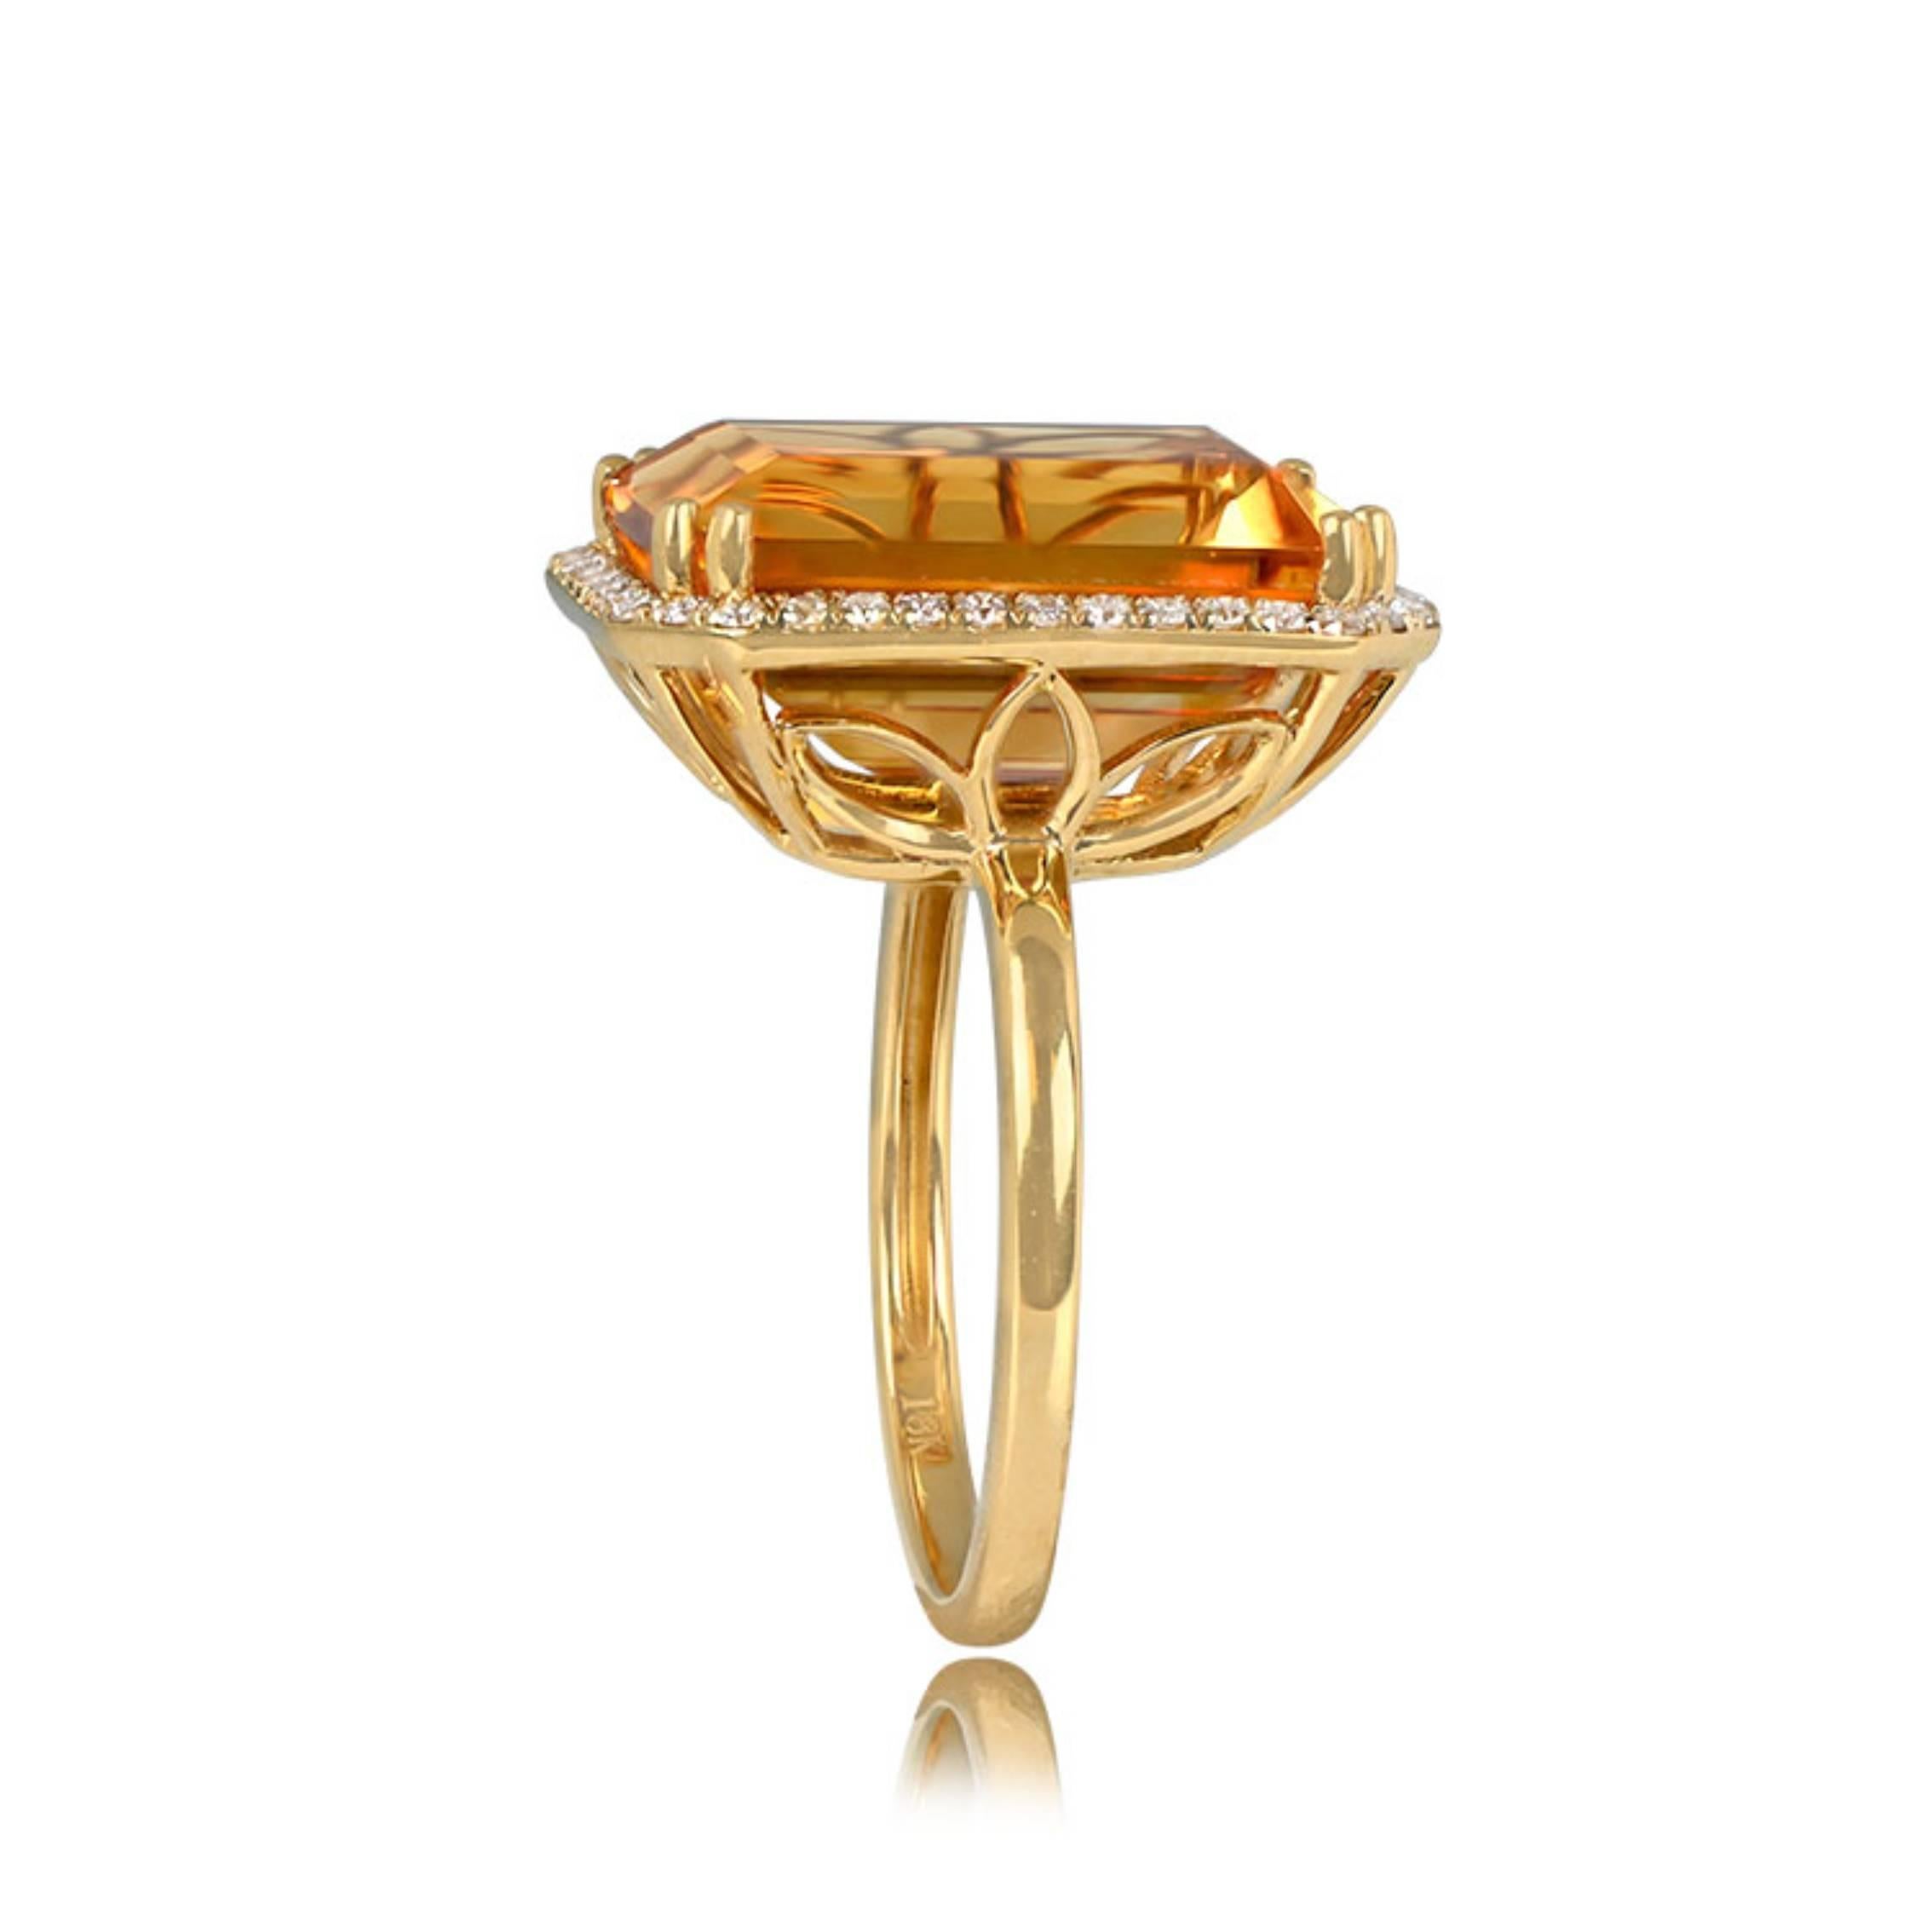 11.35ct Emerald Cut Natural Citrine Cocktail Ring, Diamond Halo, 18k Yellow Gold In Excellent Condition For Sale In New York, NY